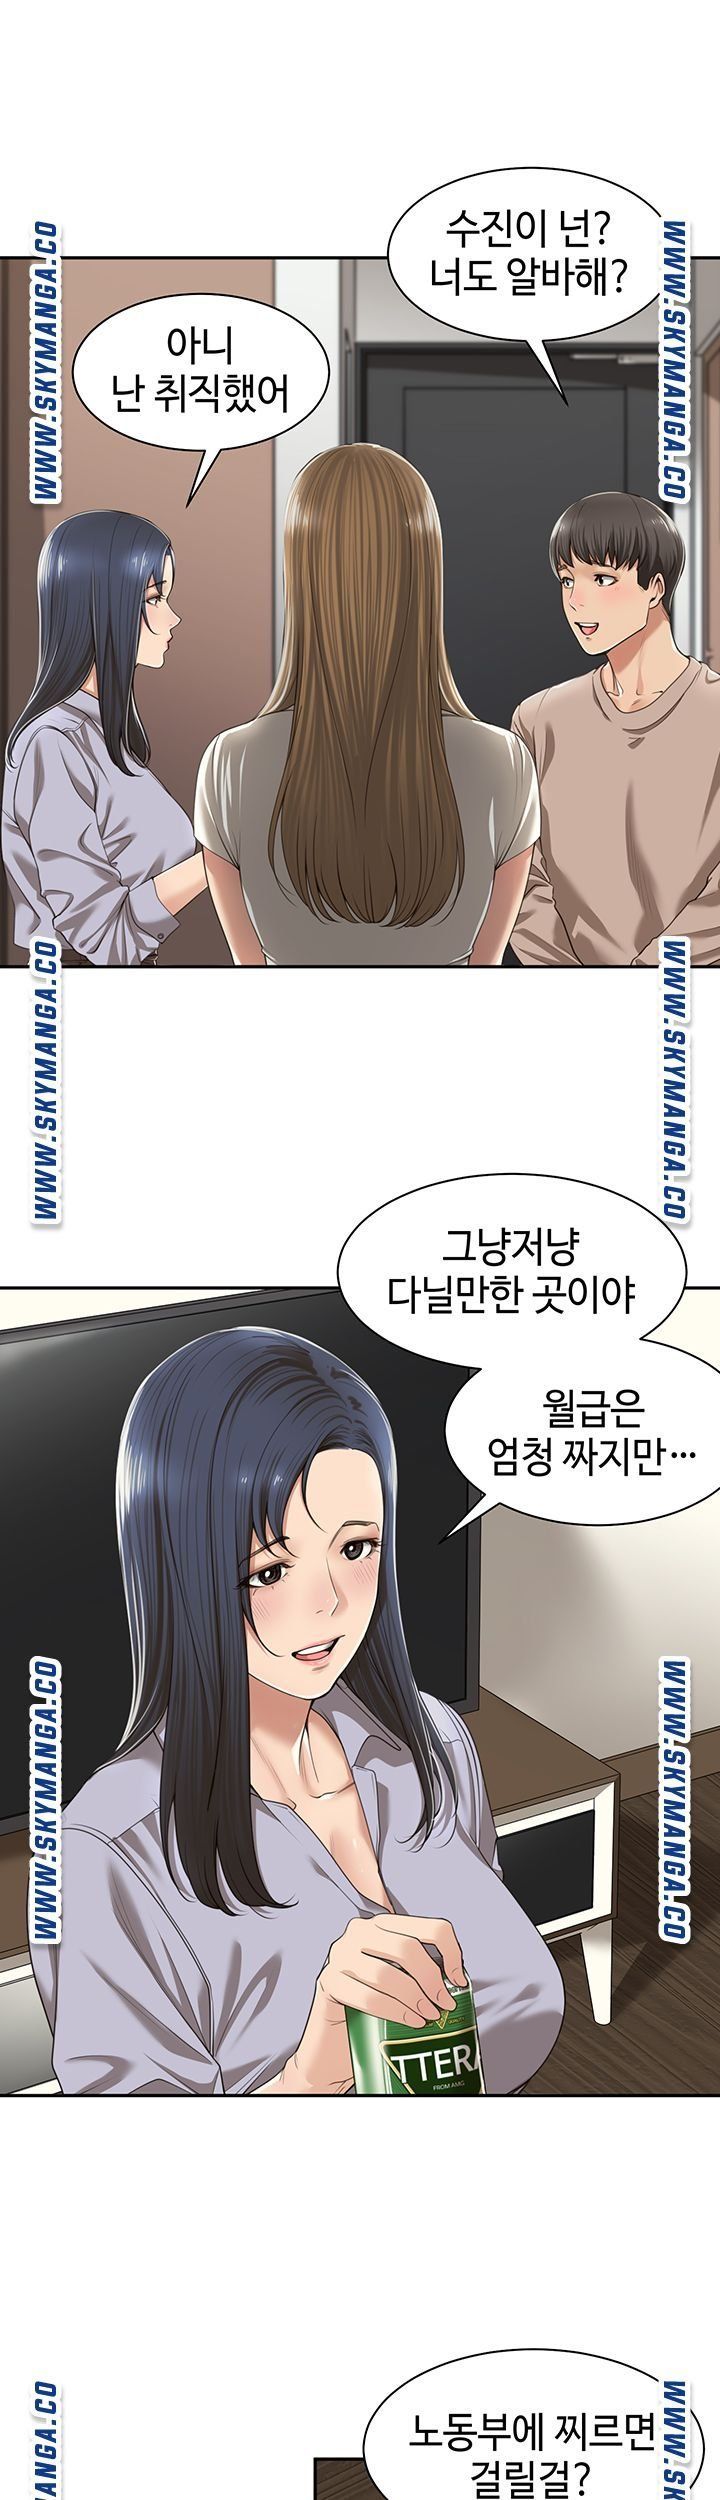 Friendly Relationship Raw - Chapter 2 Page 11